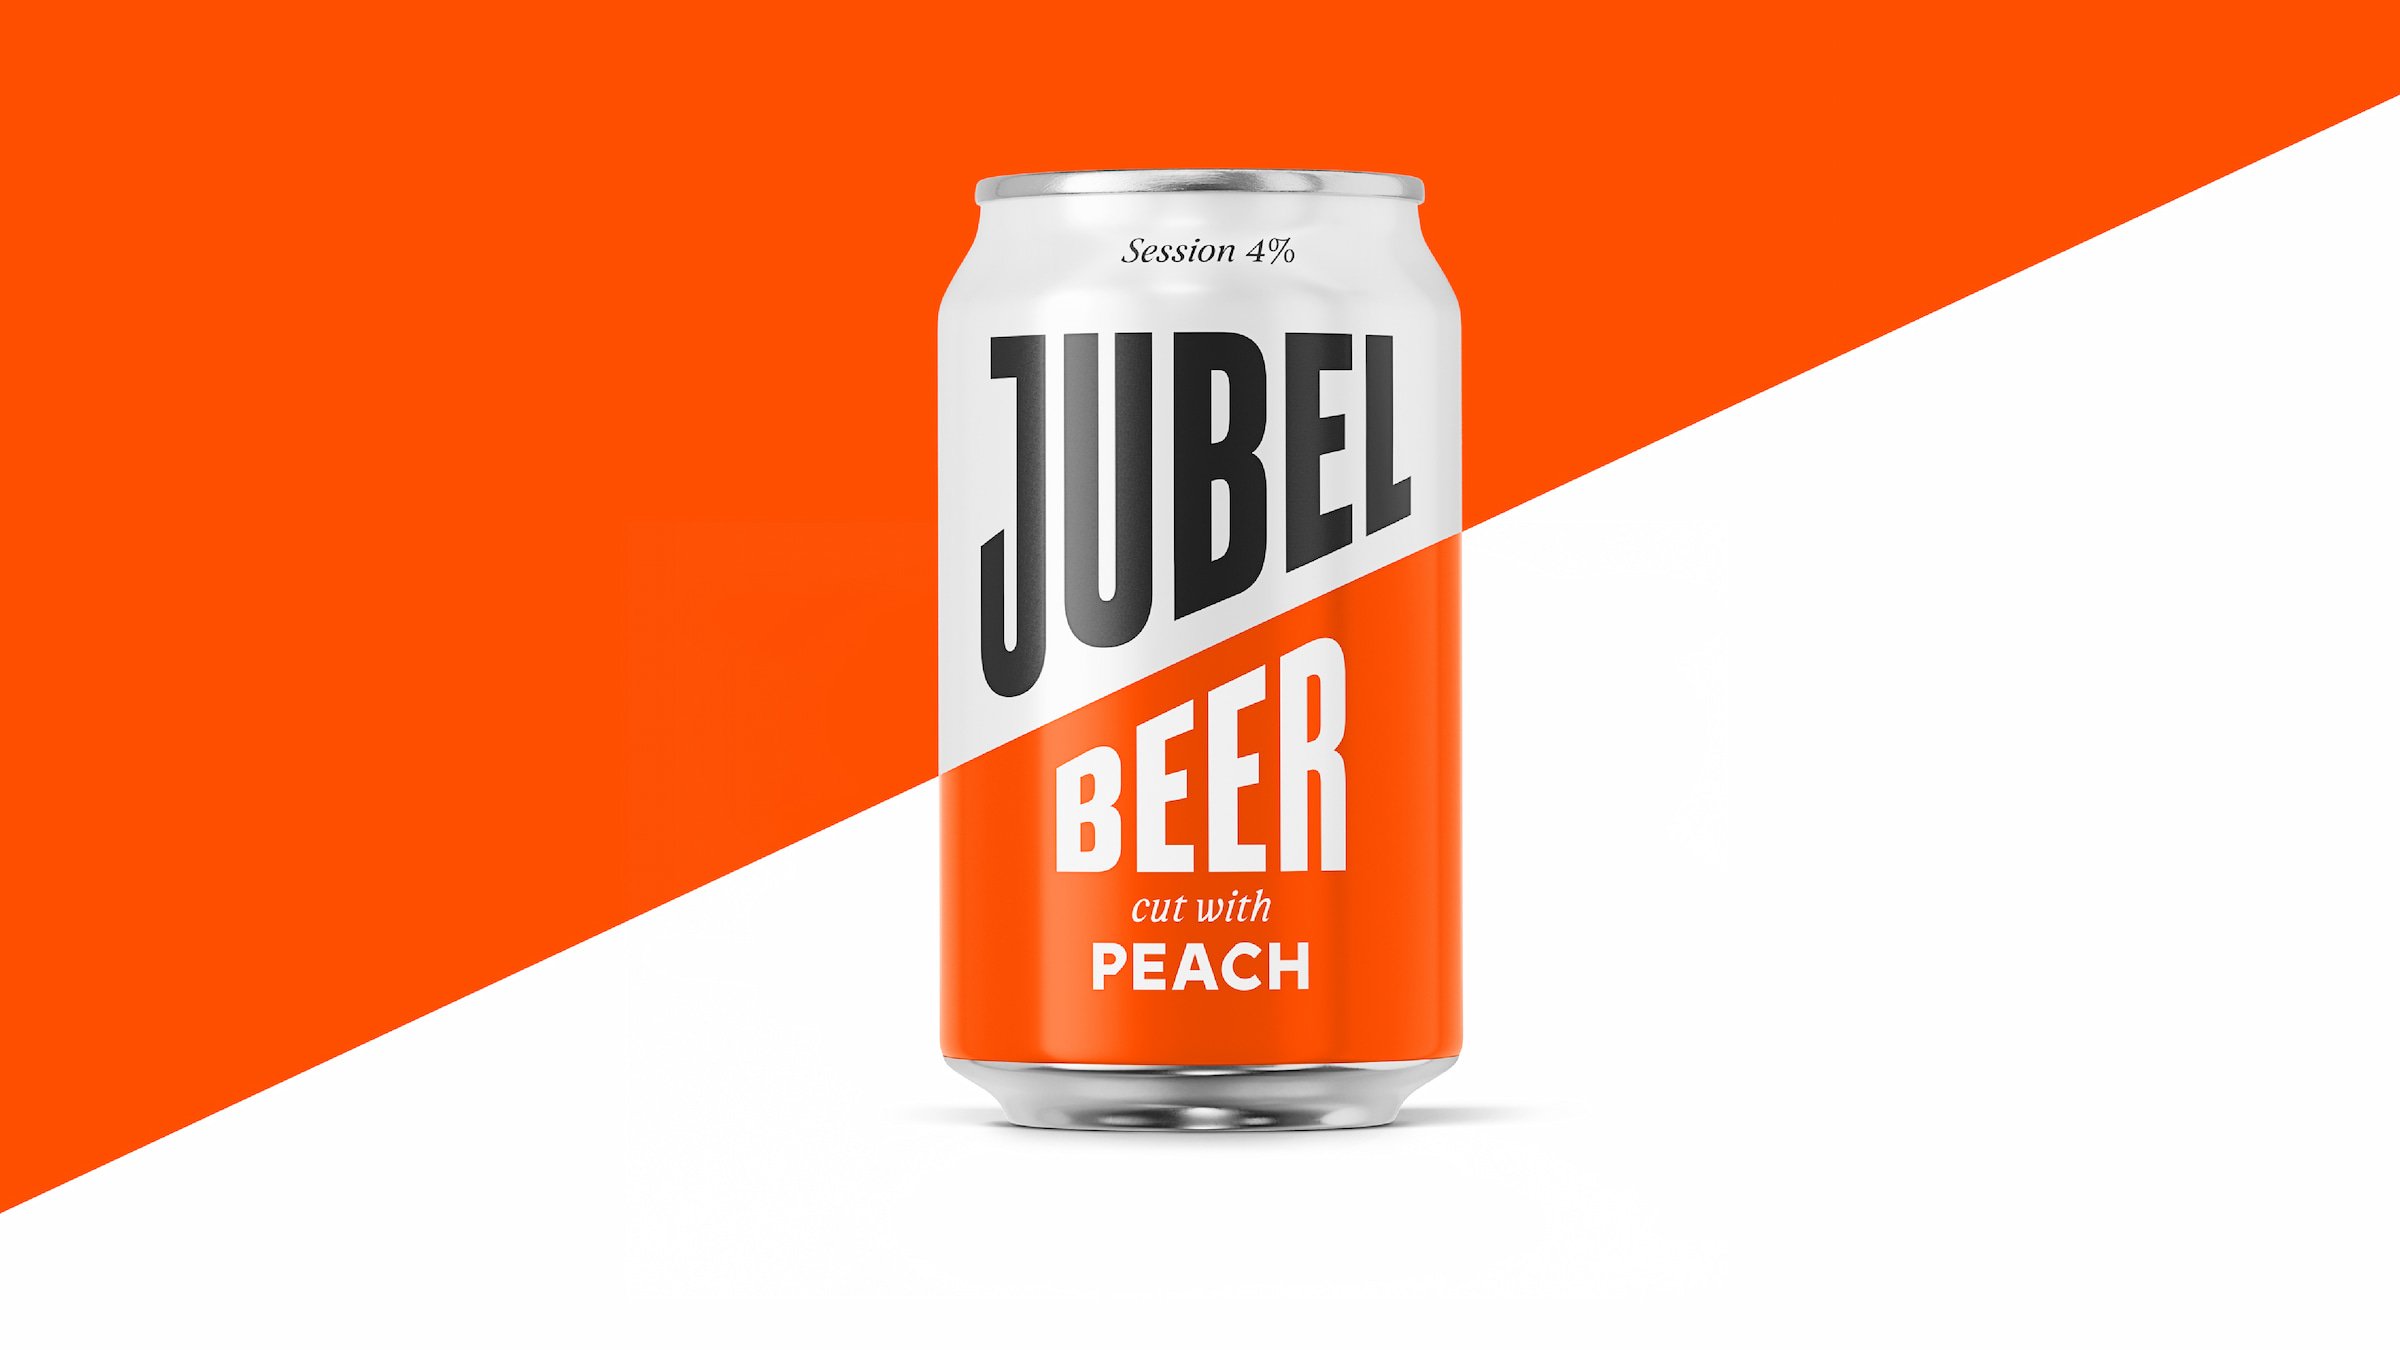 Studio Earthling’s Redesign for Jubel Beer Achieves a Timeless Feel Without Playing It Safe